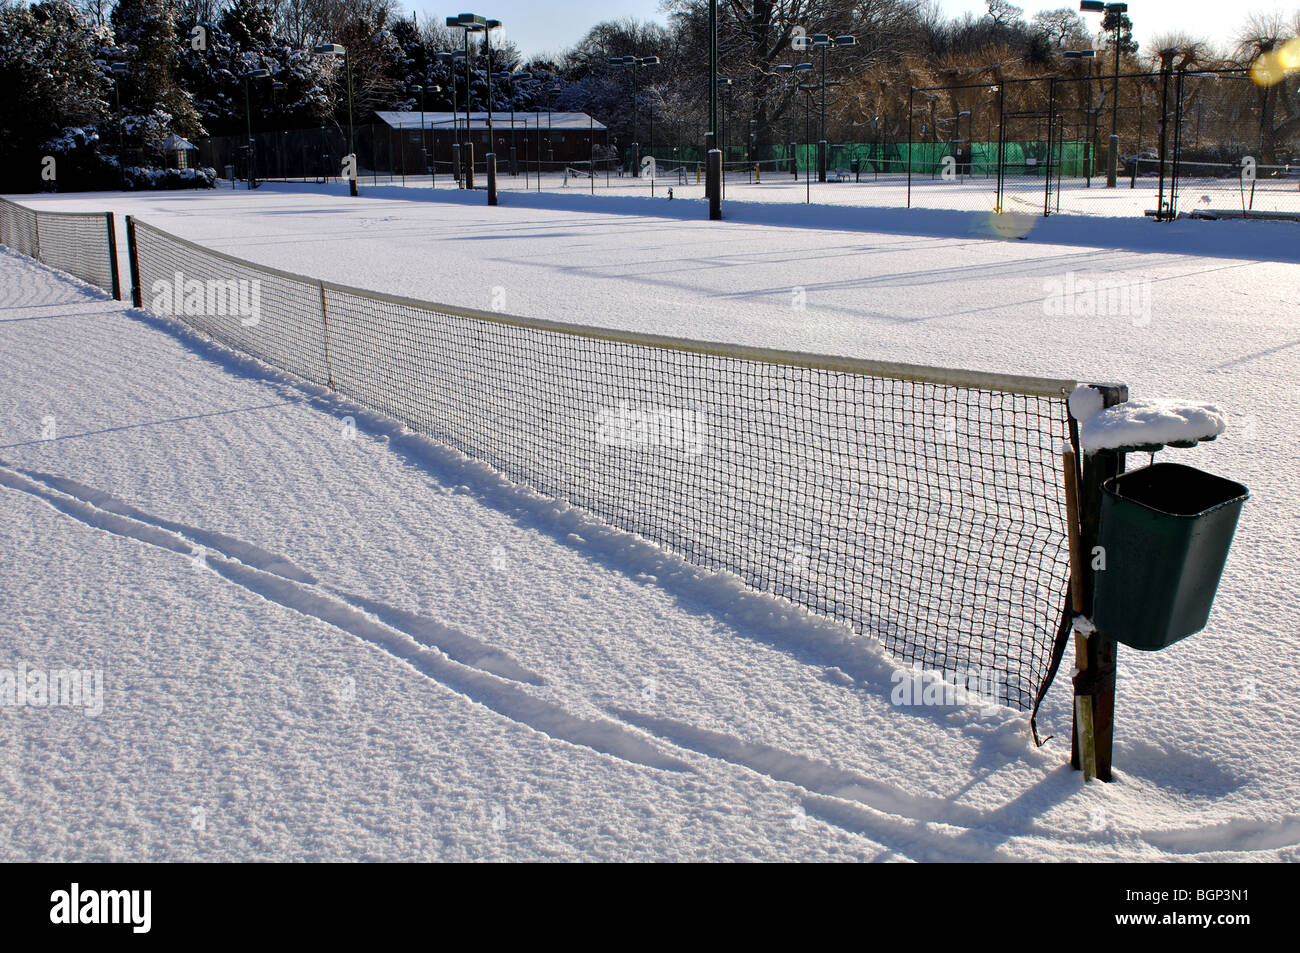 Tennis courts covered in snow, Warwick, UK Stock Photo